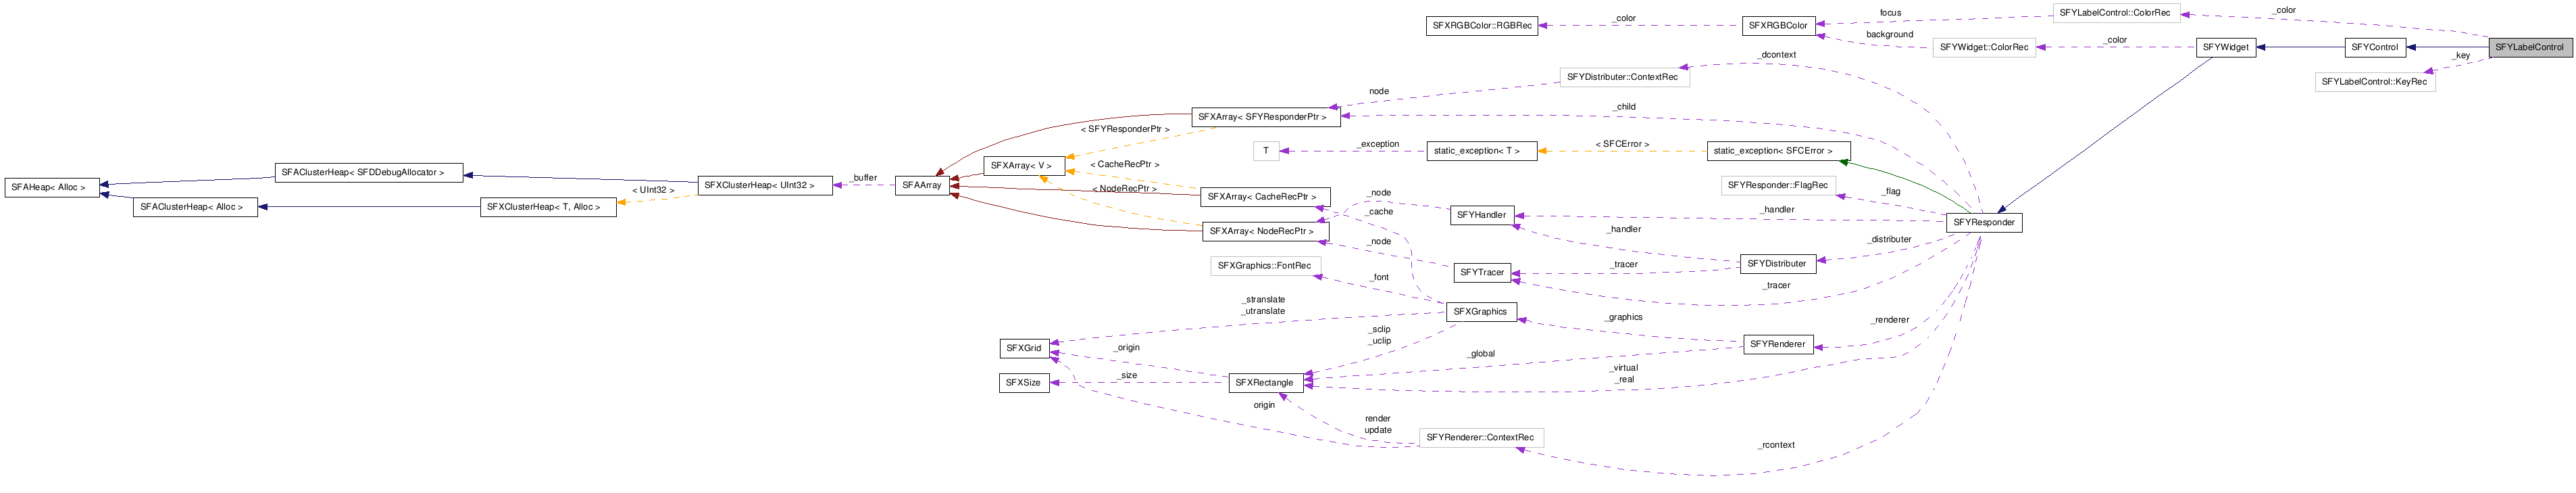  Collaboration diagram of SFYLabelControlClass